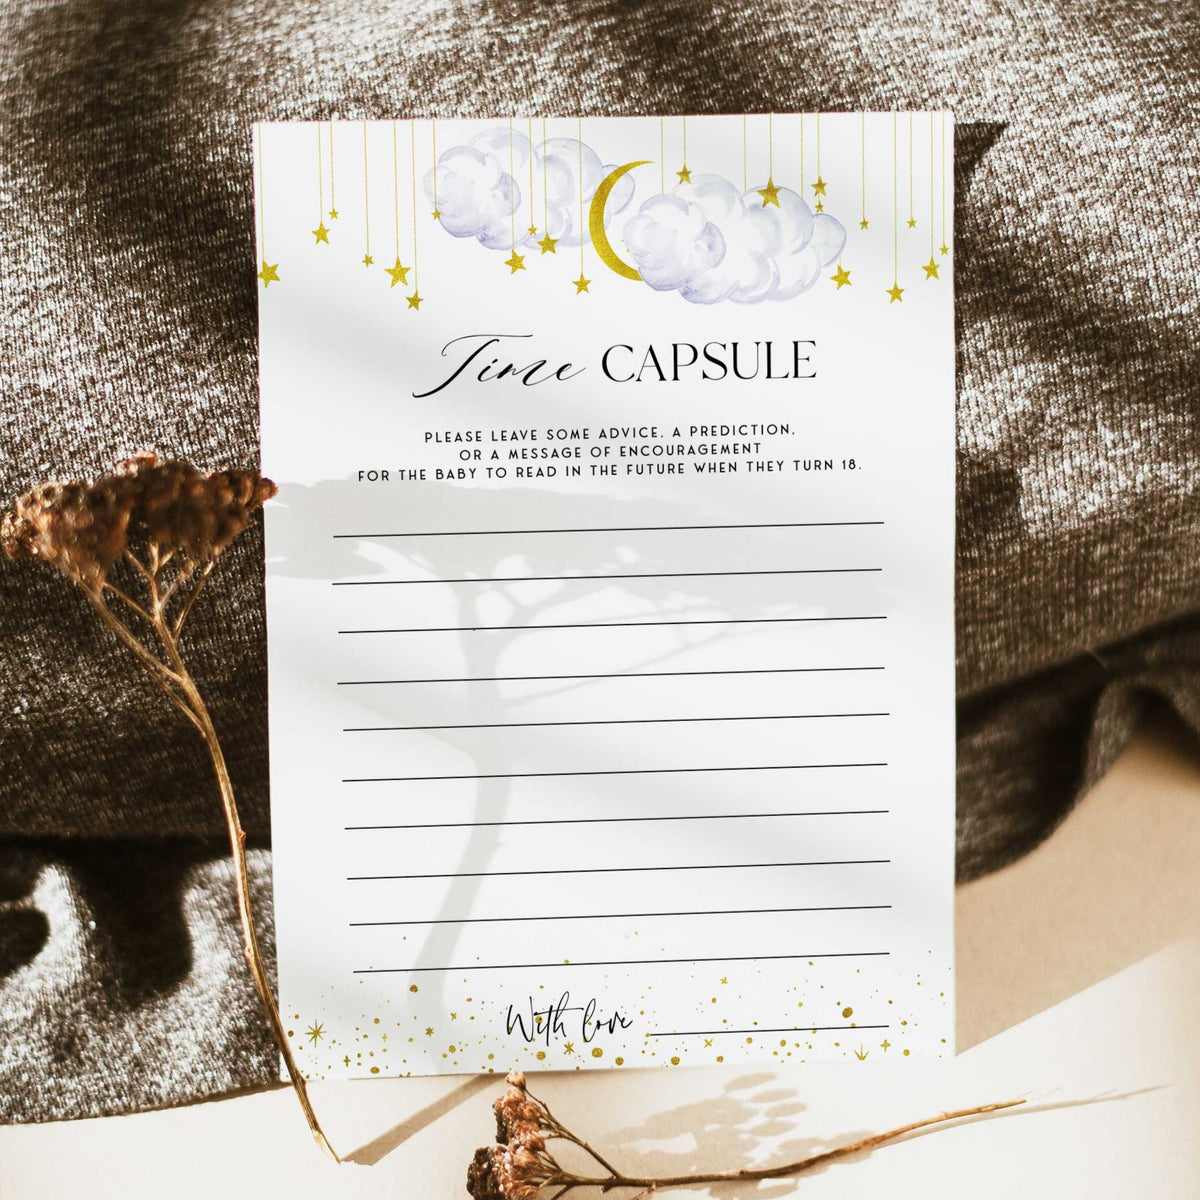 Fully editable and printable baby shower time capsule game with a little star design. Perfect for a Twinkle Little Star baby shower themed party